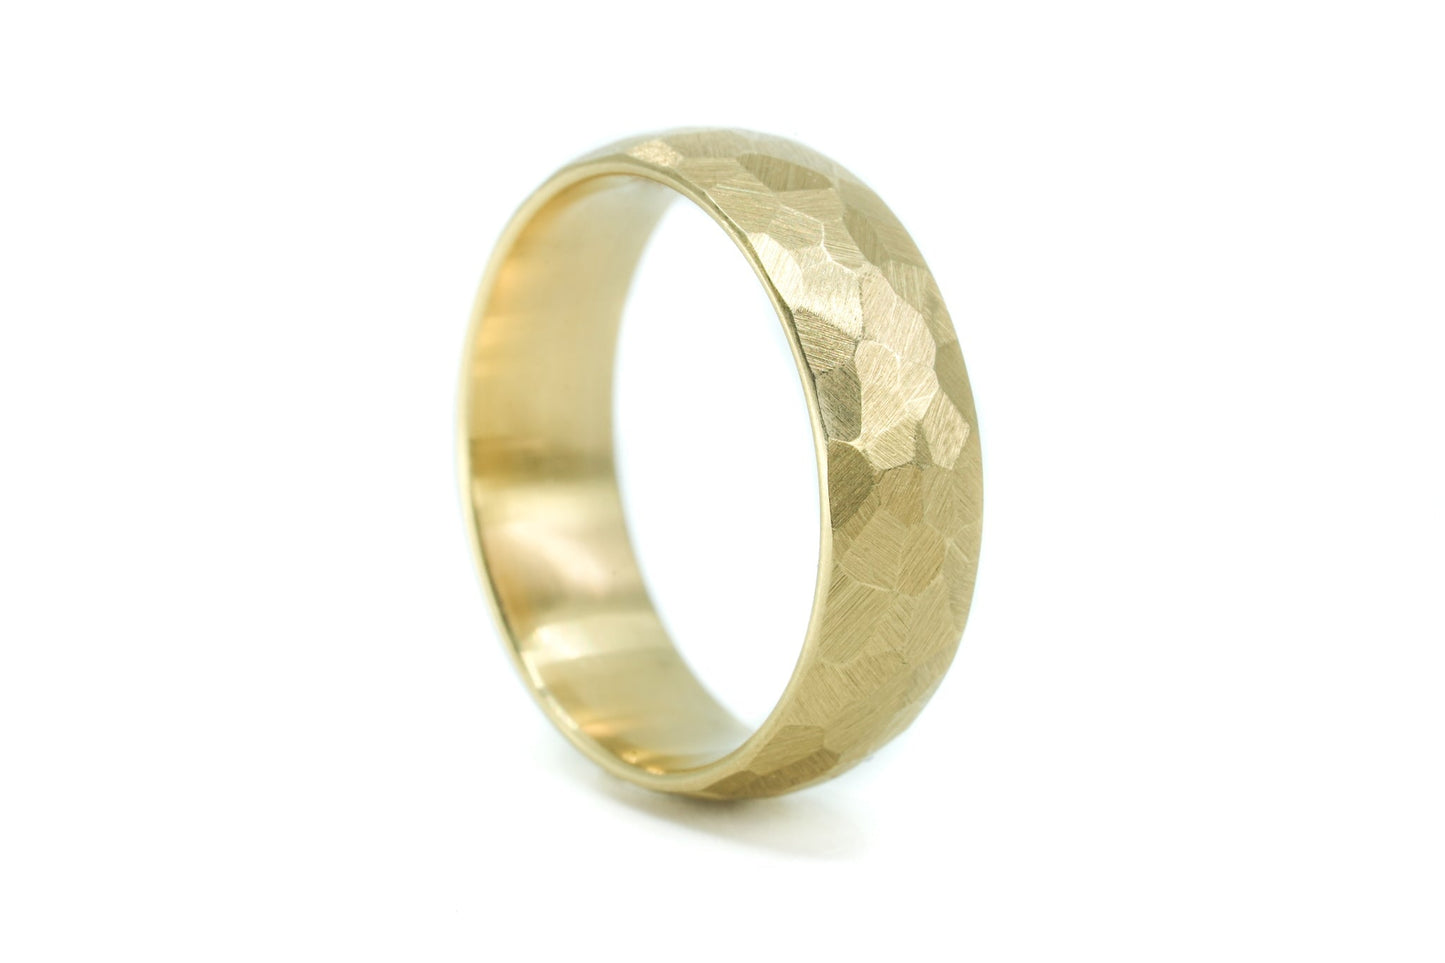 14k Yellow Gold "Charles" Couples Ring Set